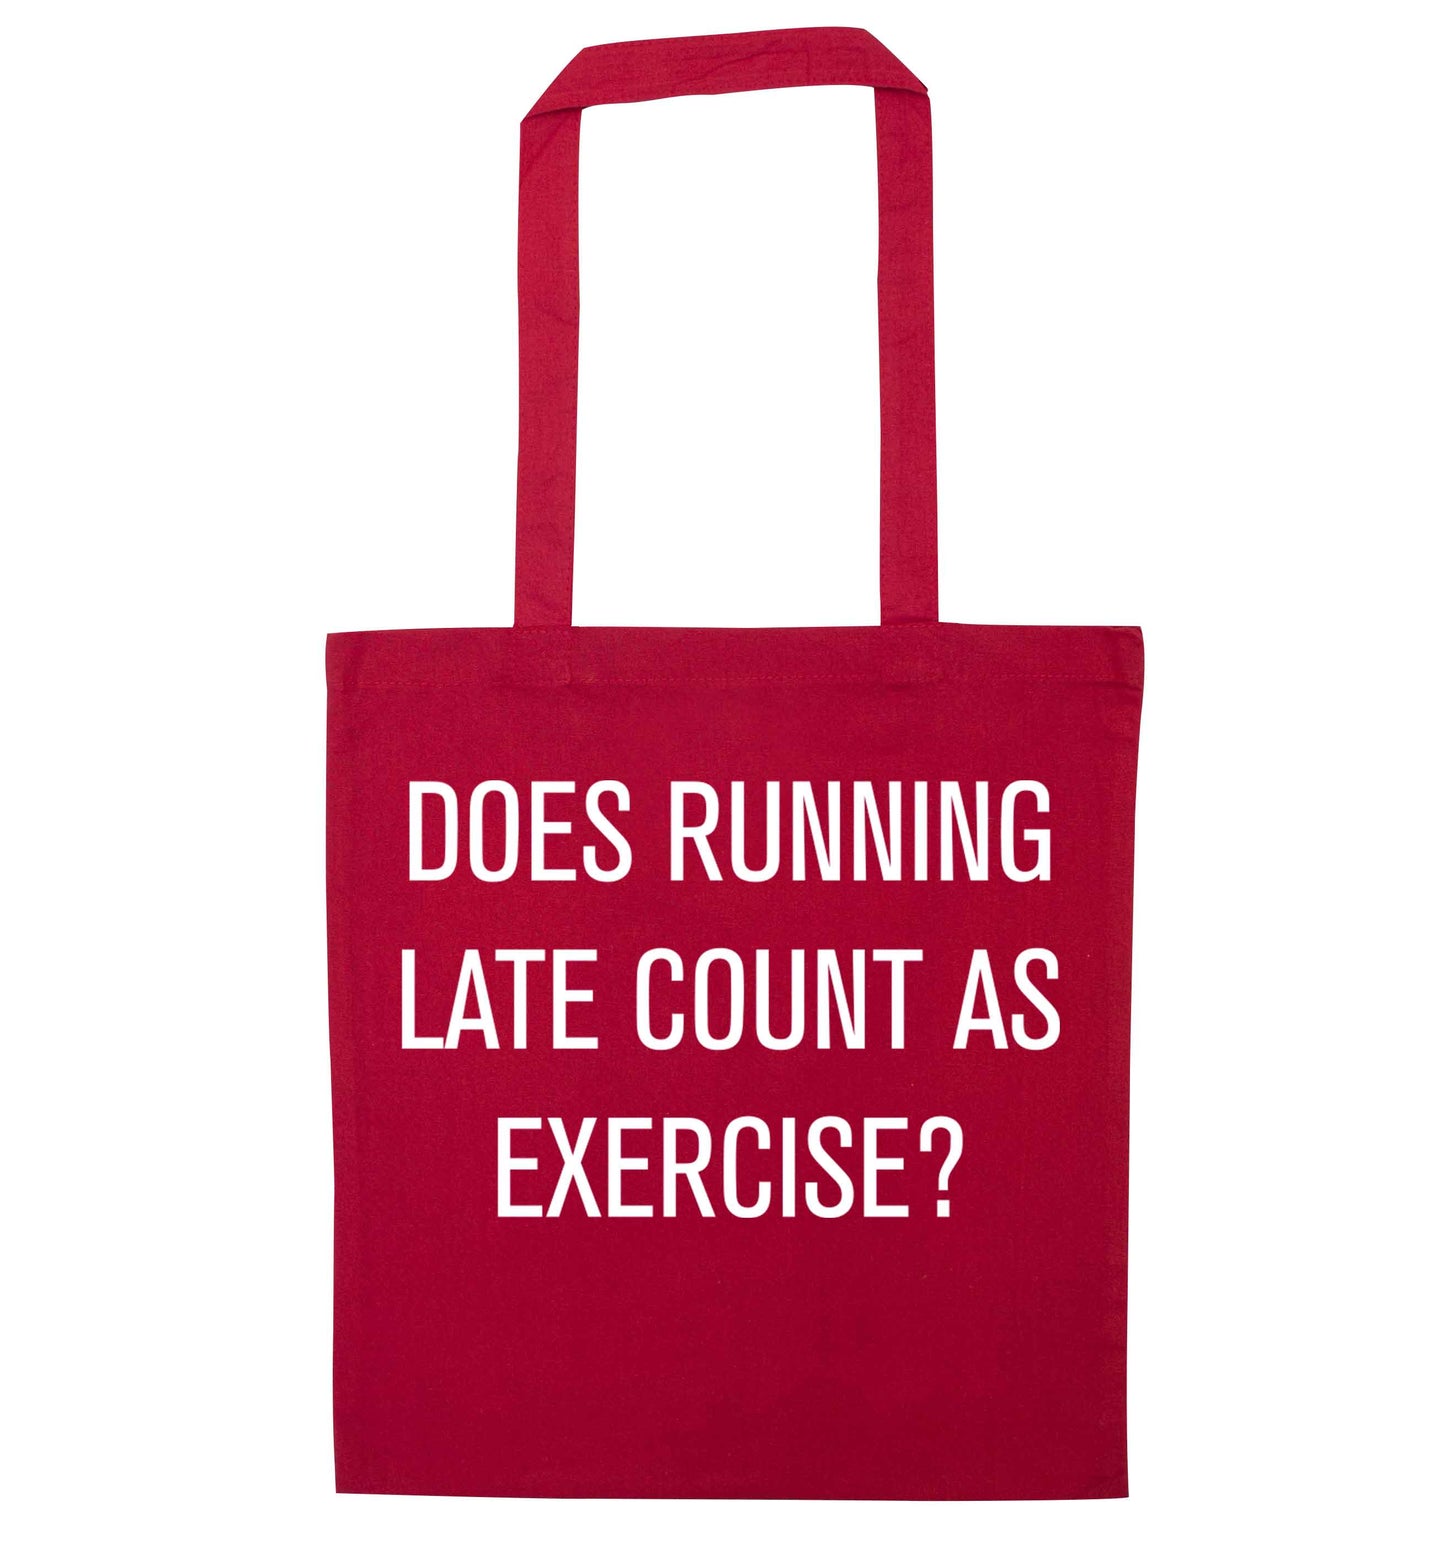 Does running late count as exercise? red tote bag